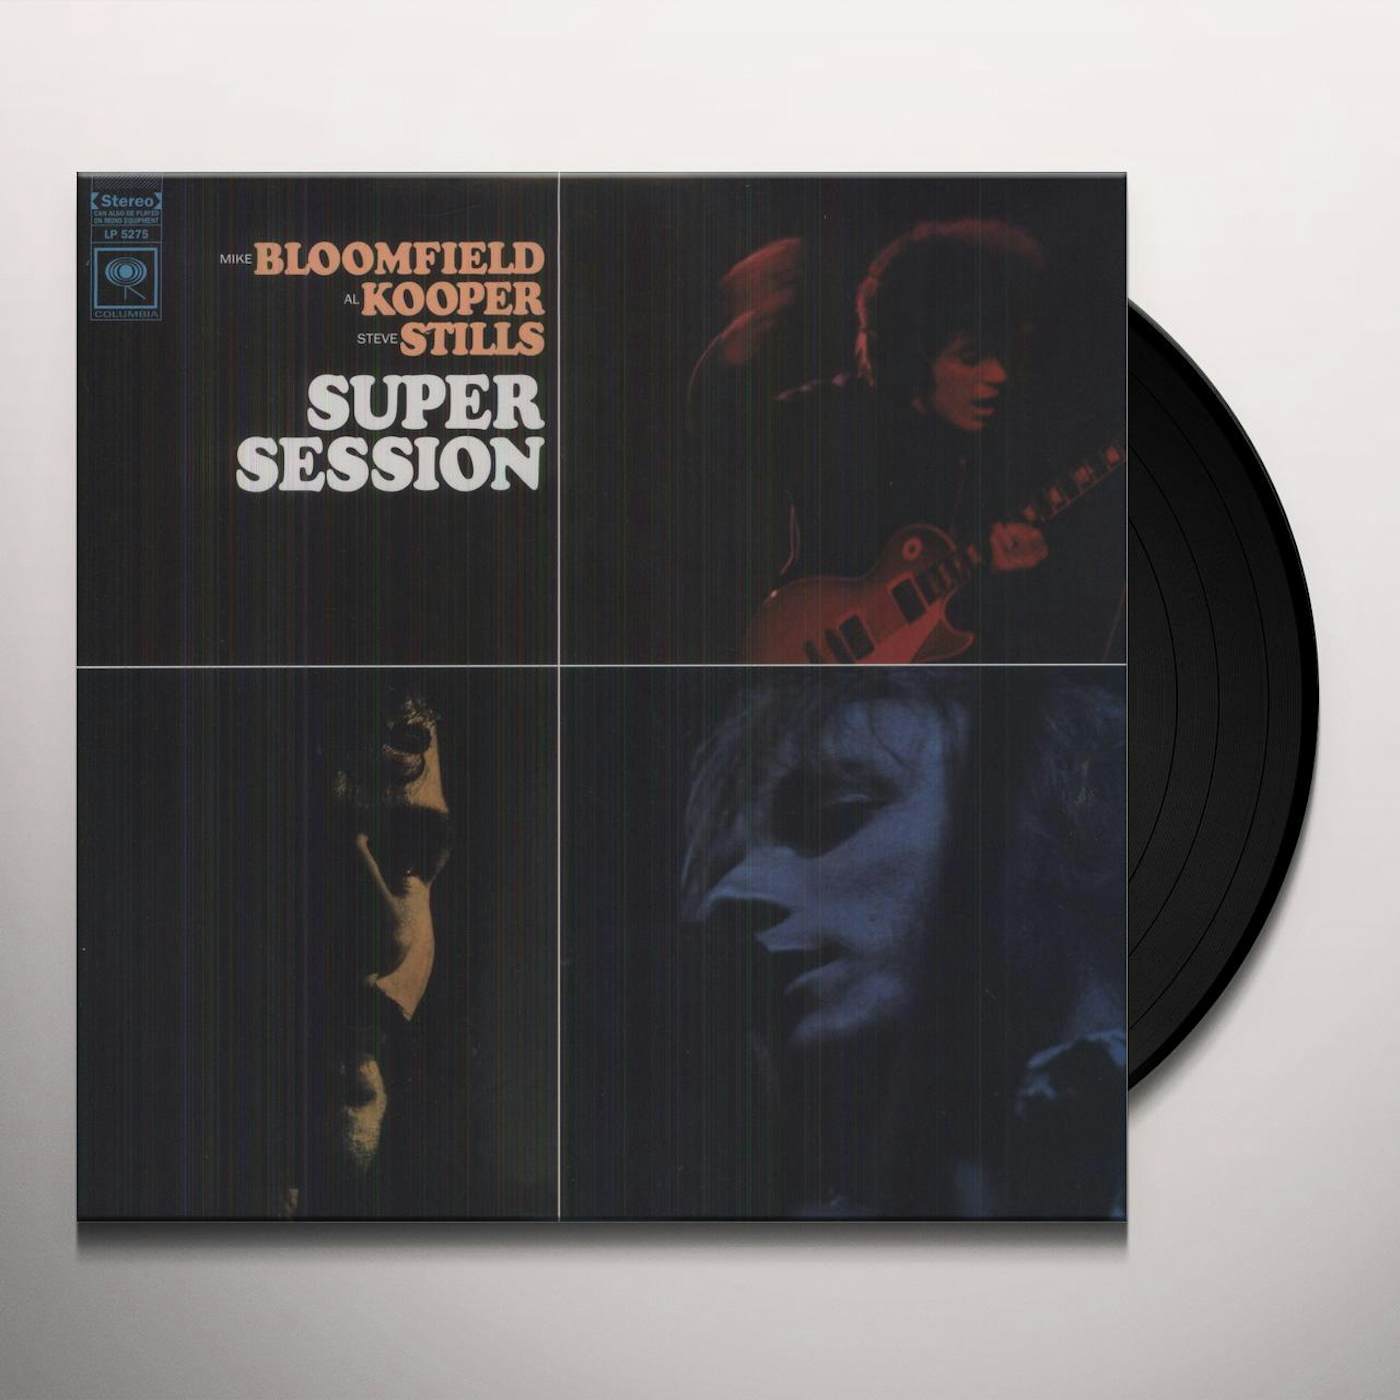 Mike Bloomfield Super Session Vinyl Record